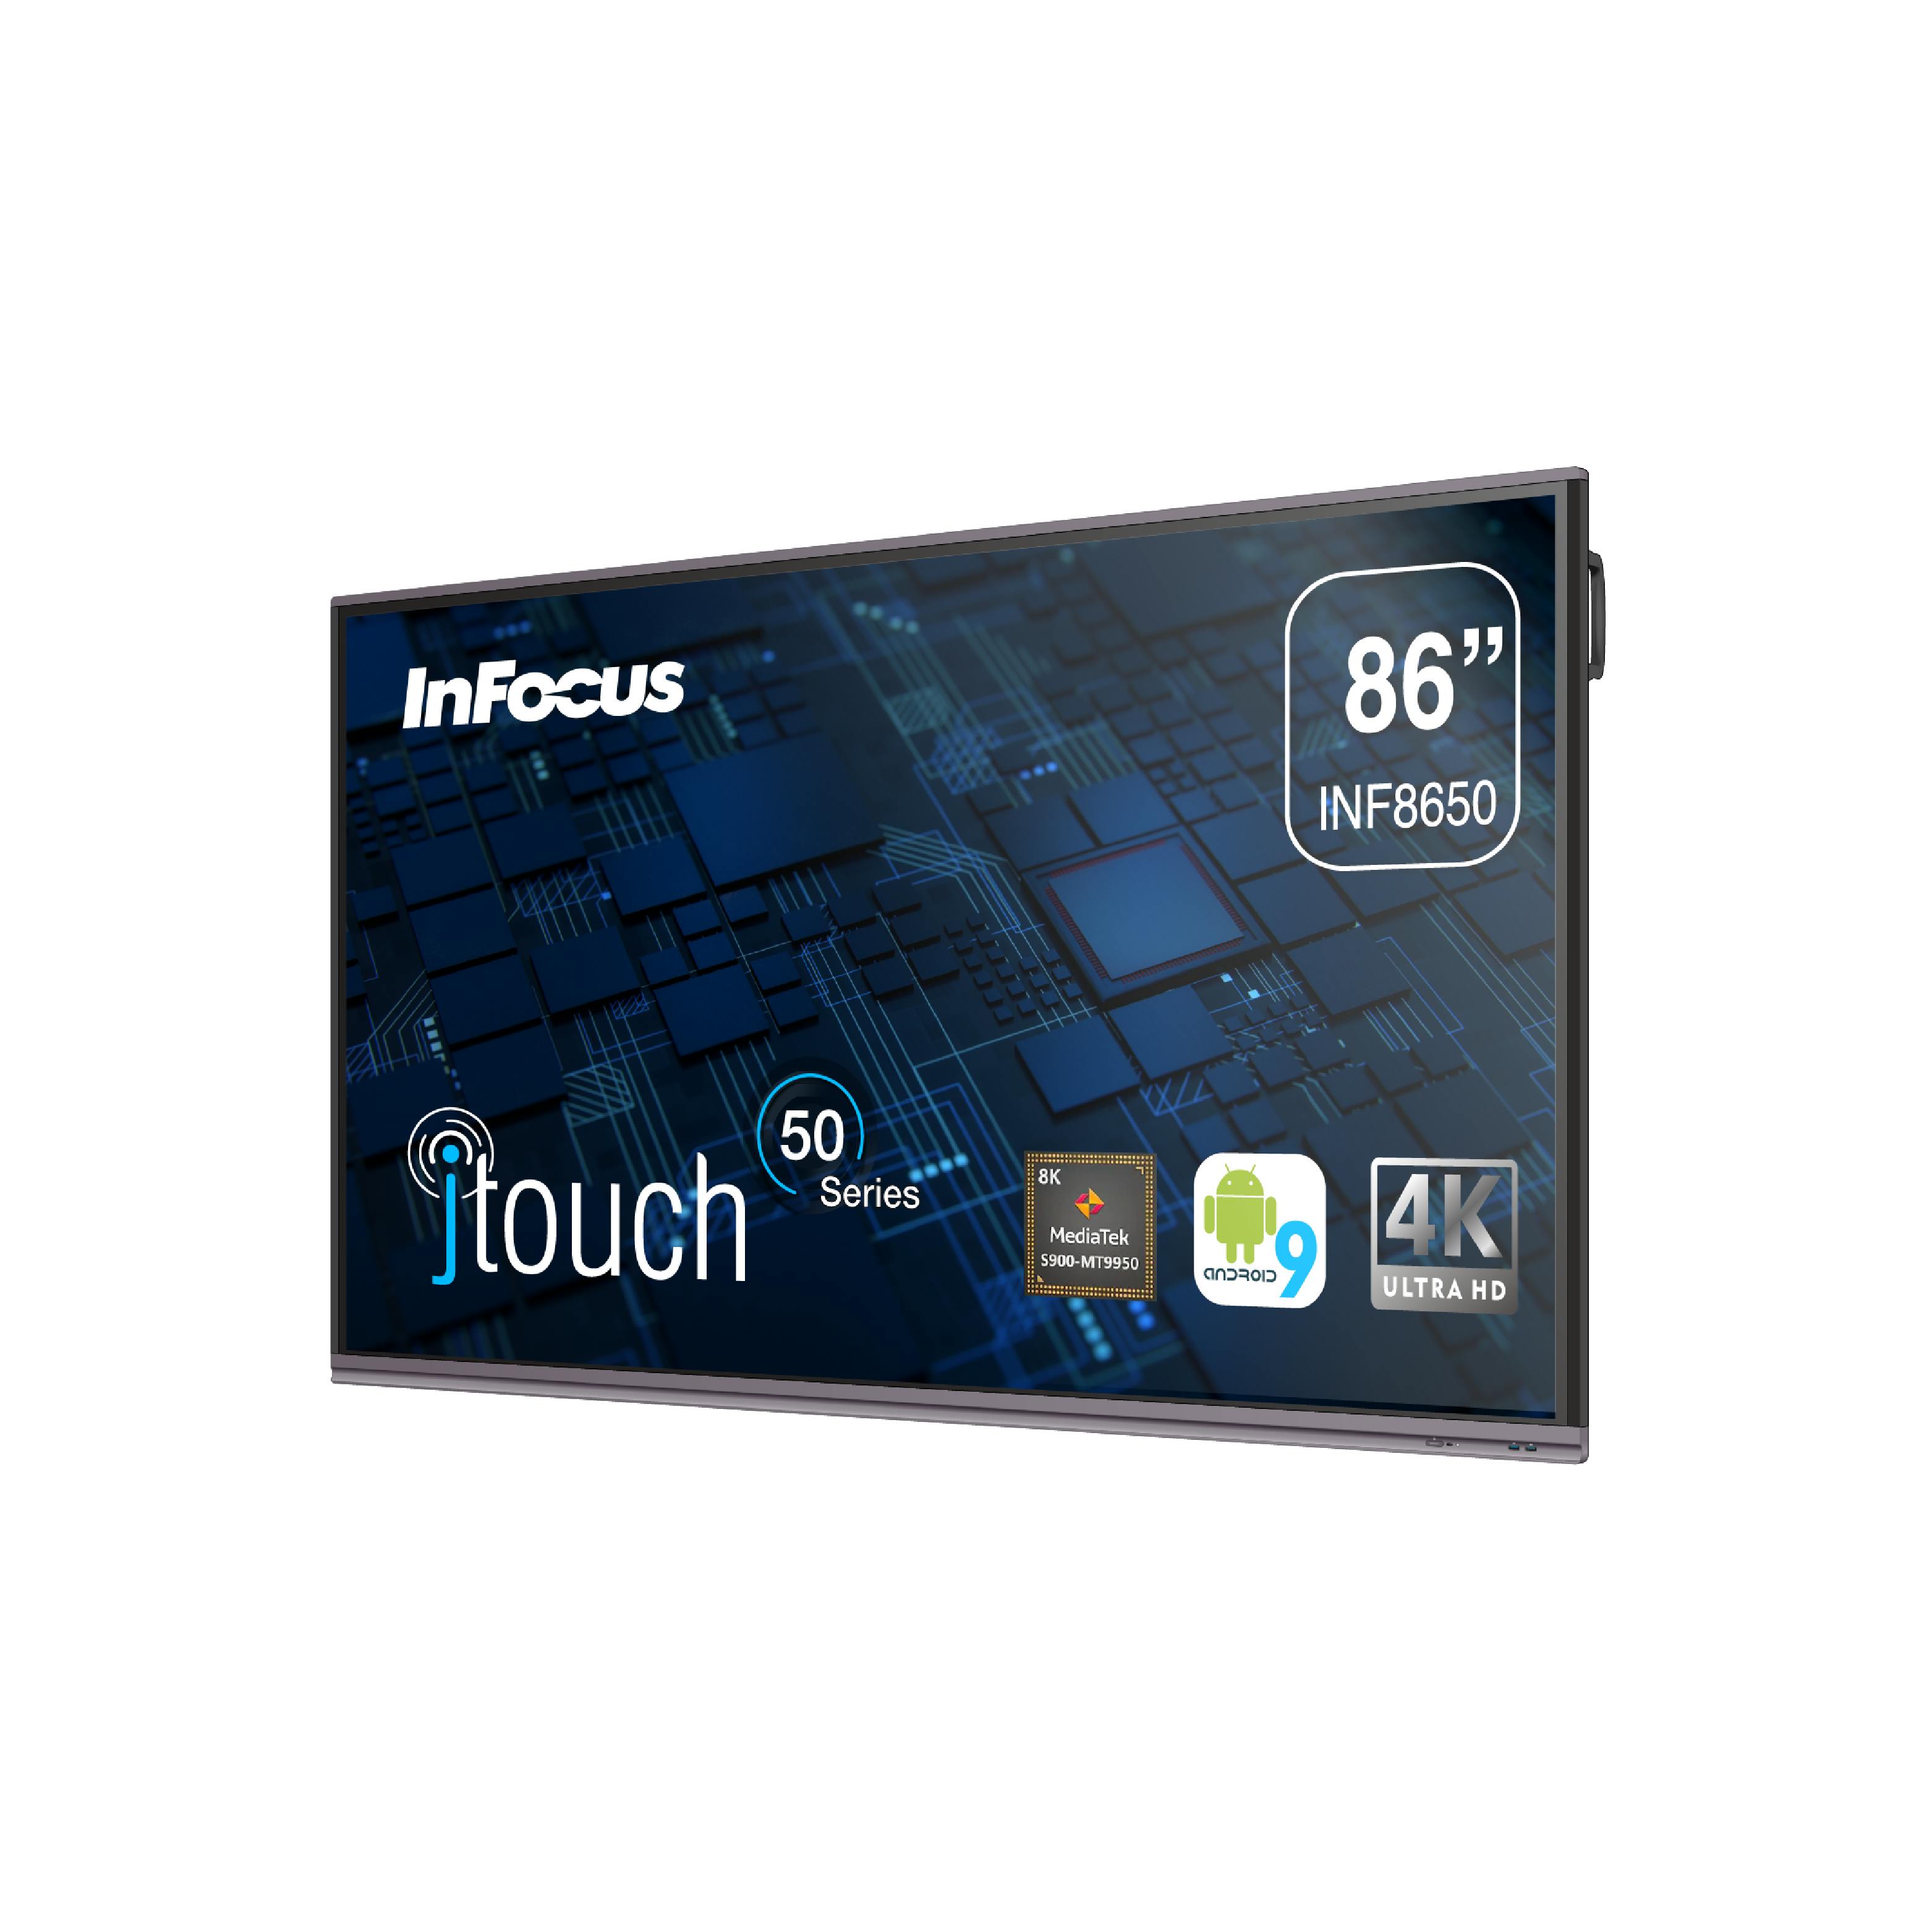 https://infocus.imgix.net/2022/04/JTouch-50-Series_INF8650_FR_90-01.png?auto=compress%2Cformat&ixlib=php-3.3.0